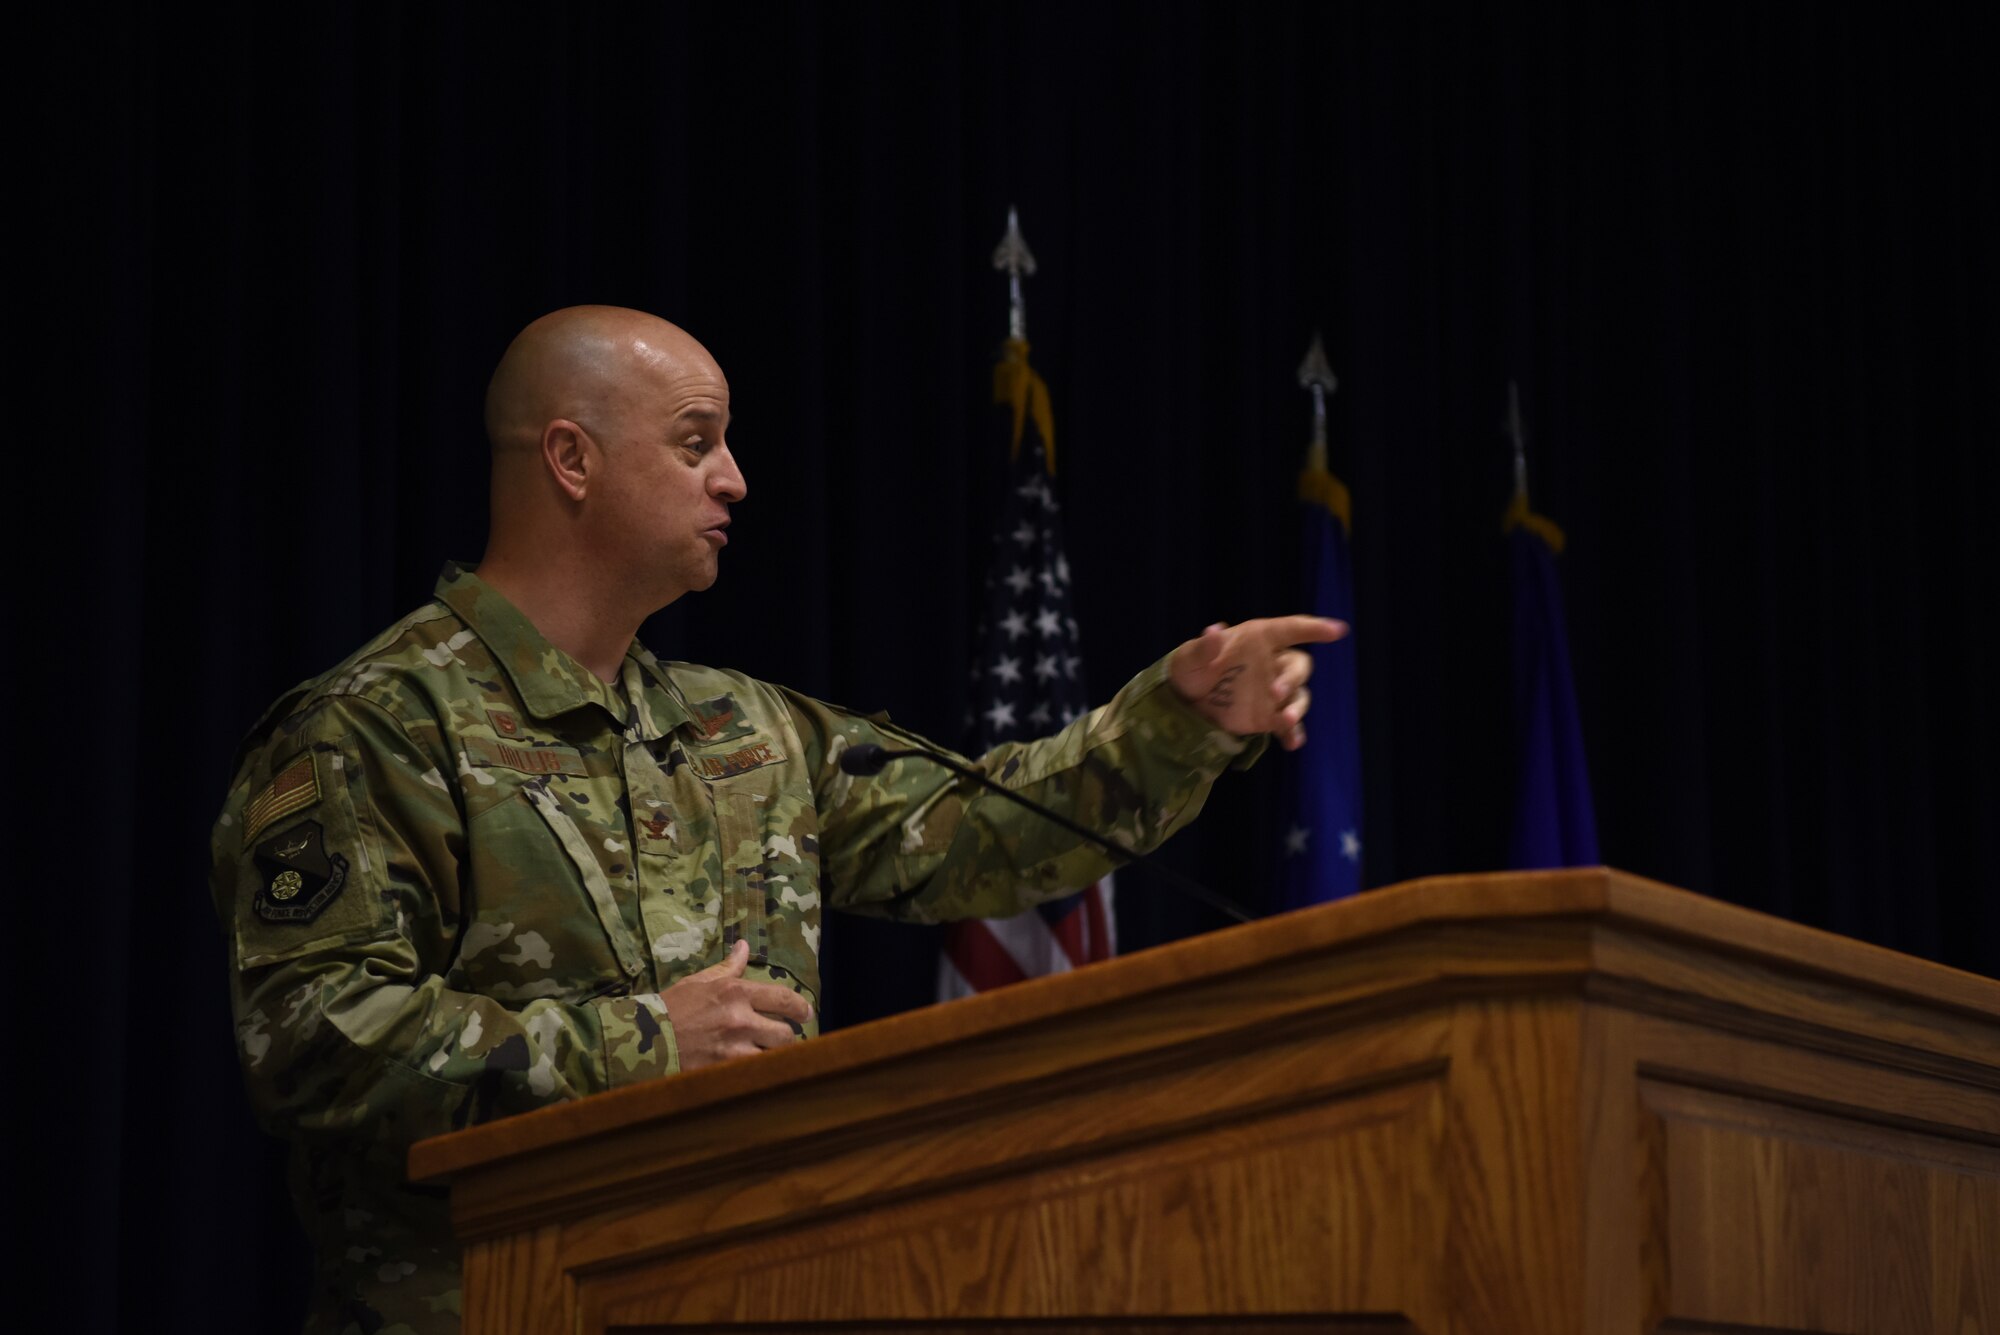 U.S. Air Force Col. Sloan Hollis, Air Force Inspection Agency commander, gives remarks during the AFIA change of command ceremony at Kirtland Air Force Base, N.M., June 27, 2019. At the ceremony, Hollis took command of AFIA from Col. Mark Pye. (U.S. Air Force photo by Senior Airman Eli Chevalier)